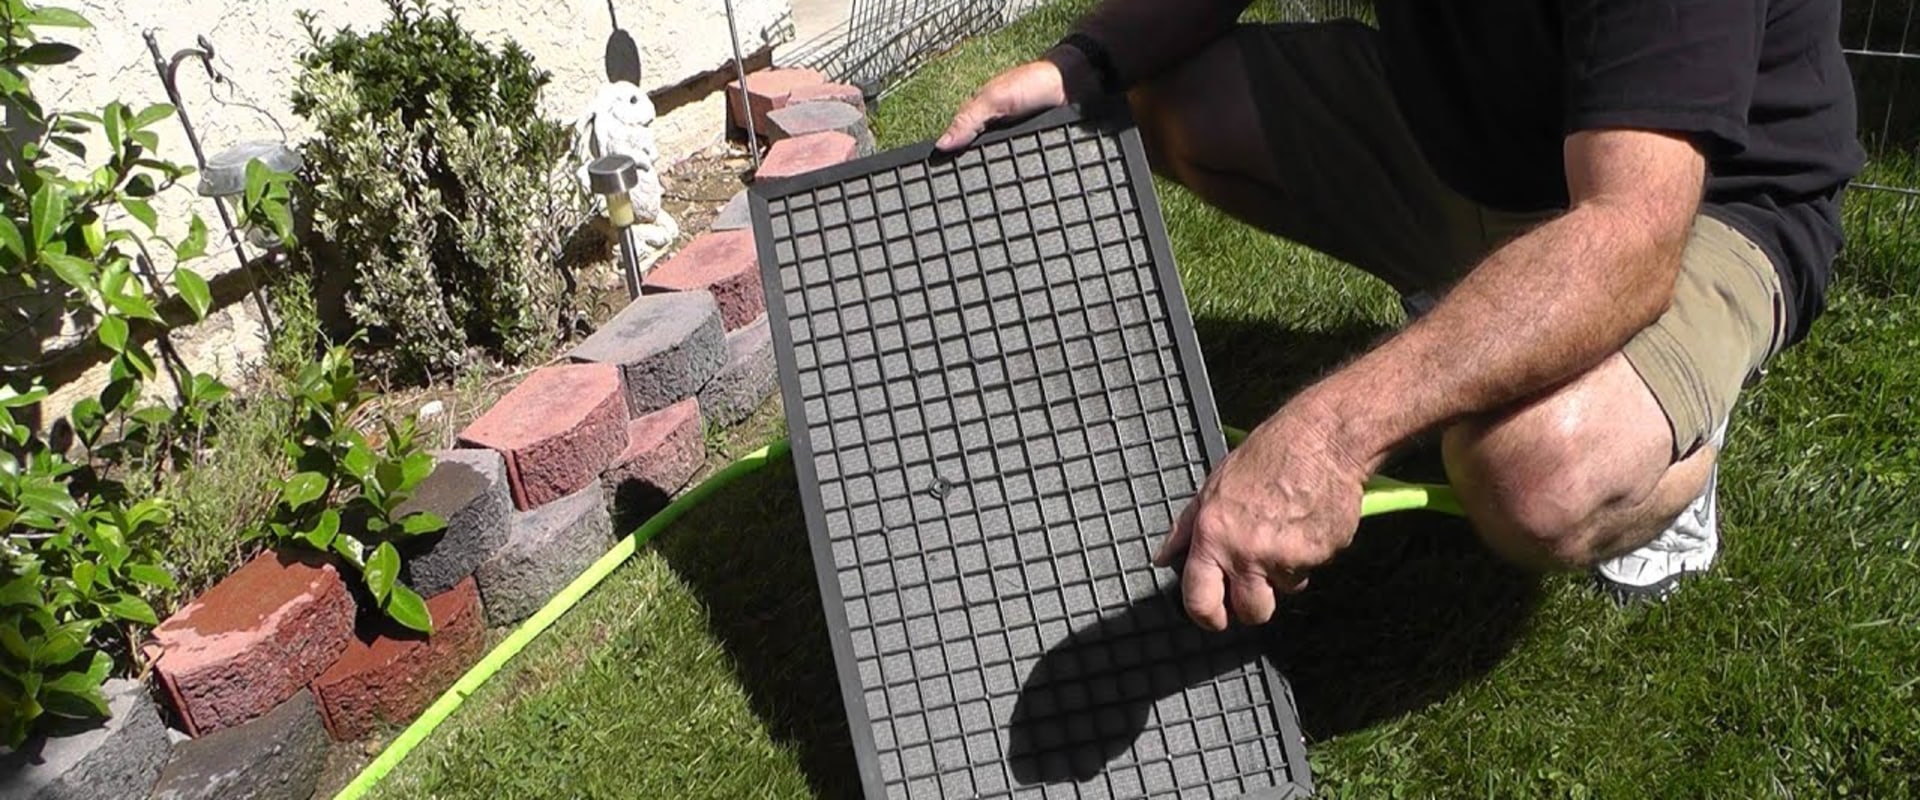 Maintaining a Washable Air Filter: A Step-by-Step Guide